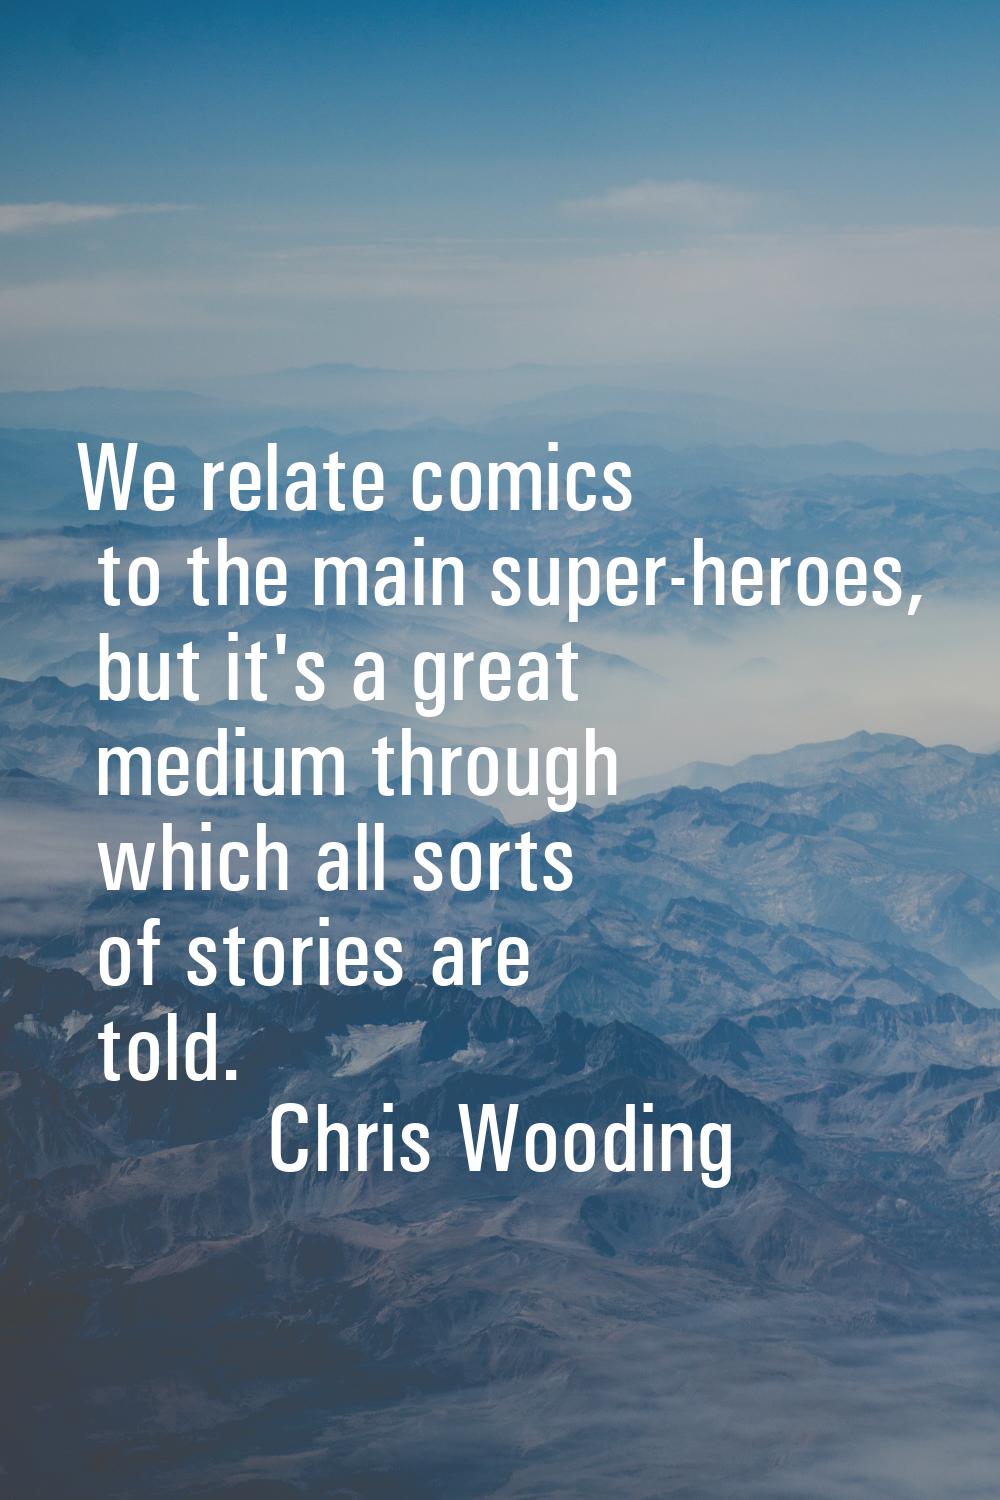 We relate comics to the main super-heroes, but it's a great medium through which all sorts of stori